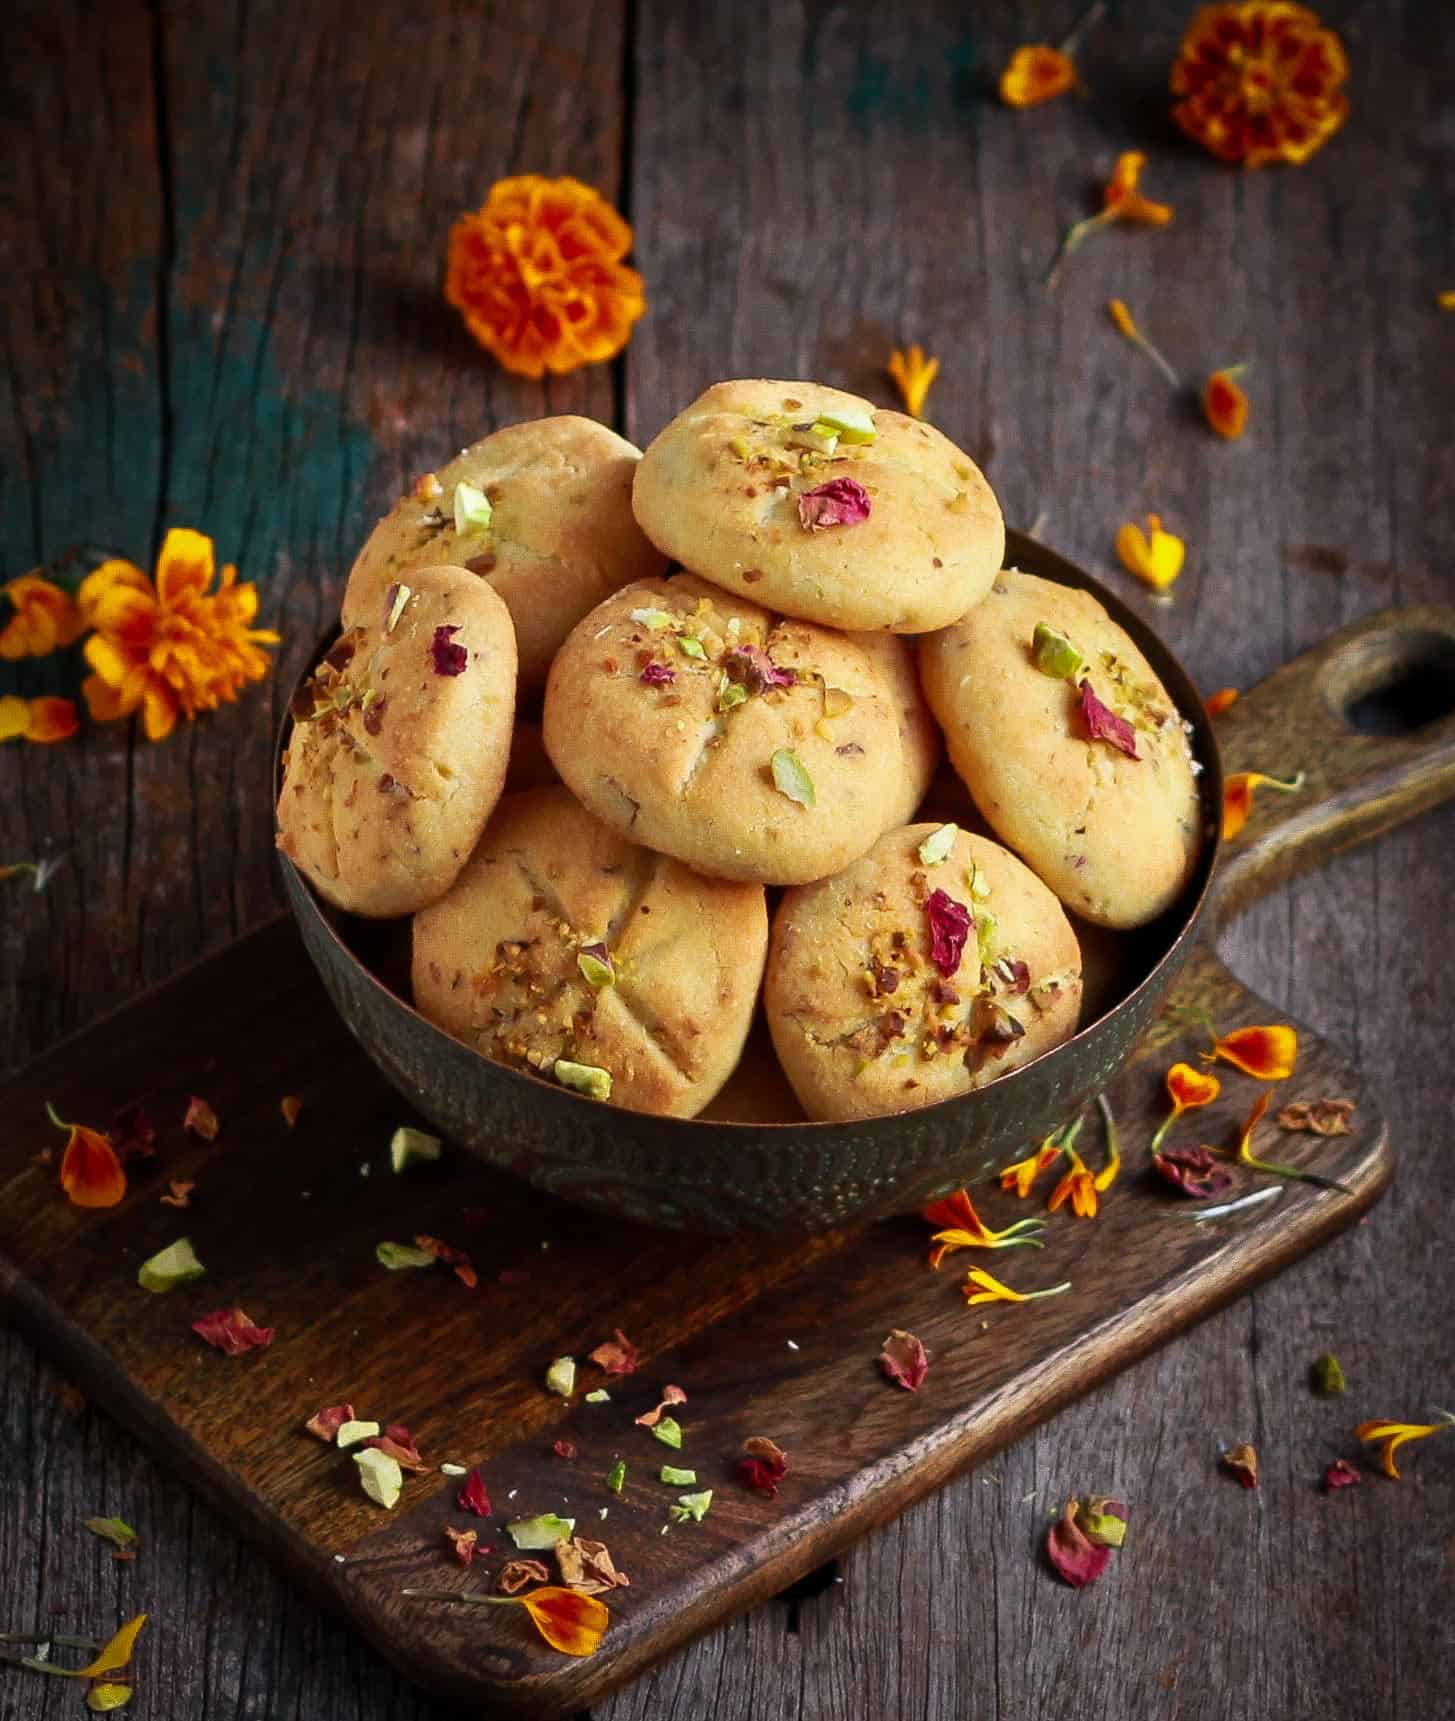 Nankhatai Indian Shortbread Cookies | 8 Indian Sweets Recipes For Diwali